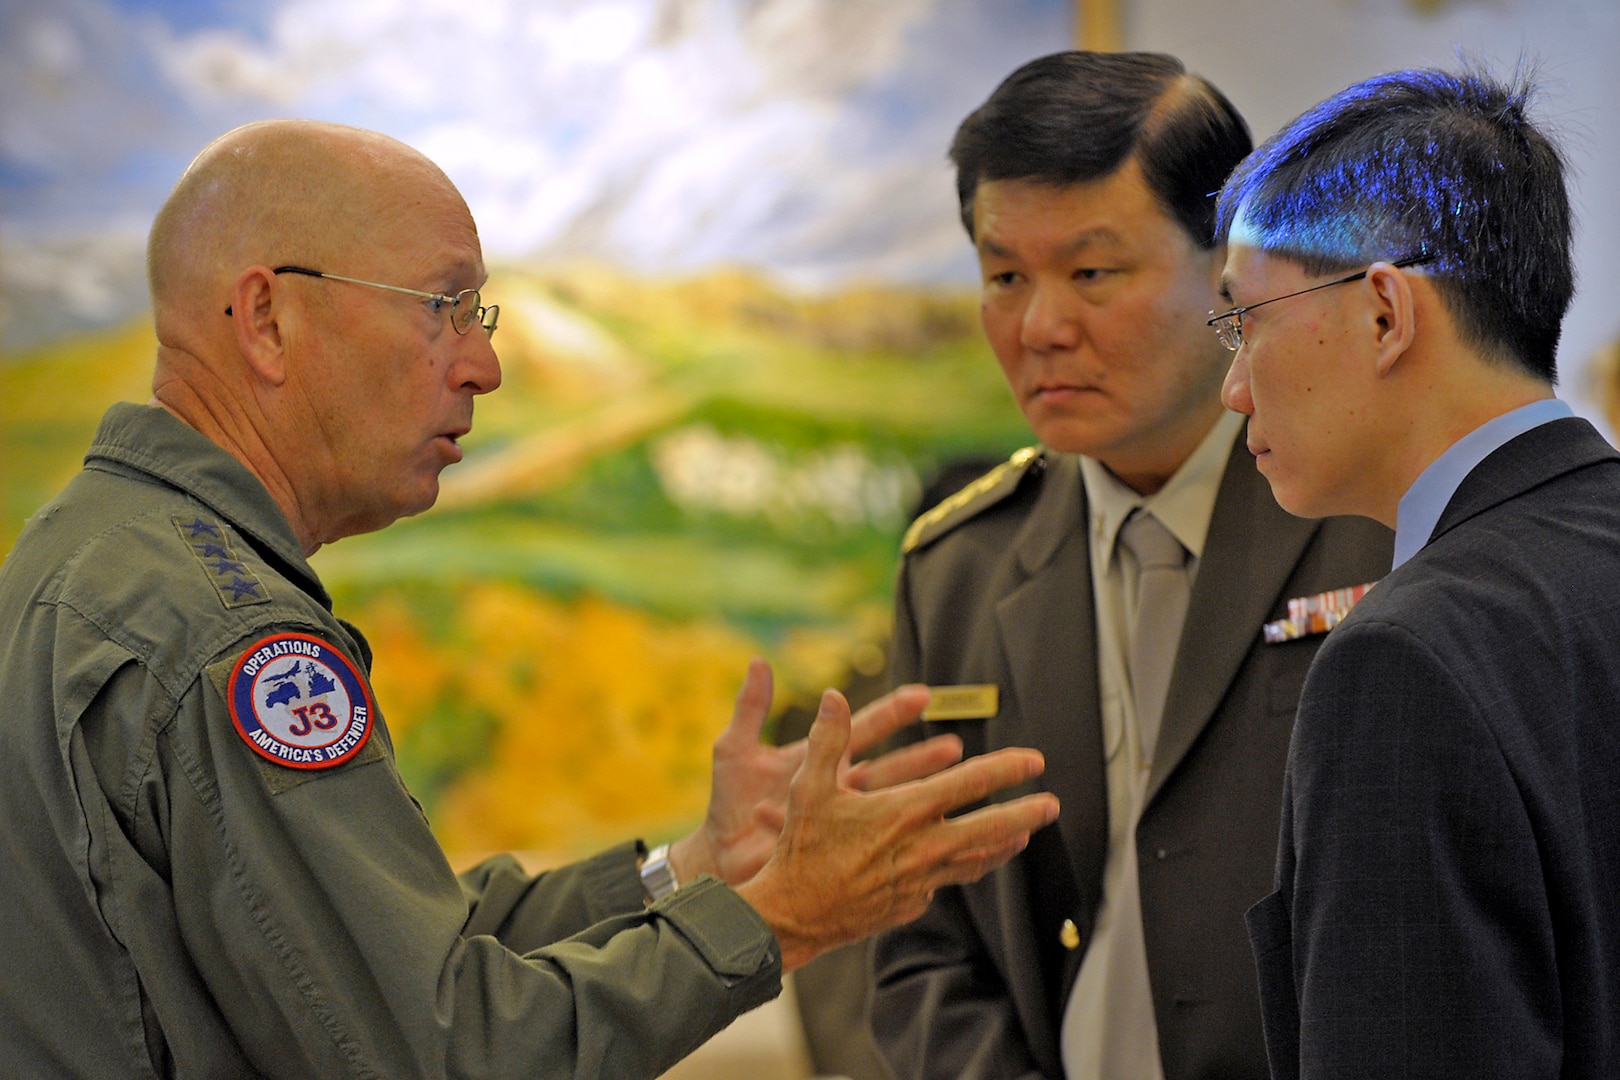 Gen. Gene Renuart, commander of North American Aerospace Defense Command and U.S. Northern Command, talks with military and civilian representatives from Singapore at NORAD’s and USNORTHCOM’s Homeland Defense and Civil Support Perspectives Forum in Colorado Springs, Colo., Oct. 31, 2008. About 60 officials from Australia, Canada, Mexico, Norway, Singapore, the United Kingdom and the United States met to discuss methods of and ways to improve Homeland Defense and Civil Support processes. Photo by Sgt. 1st Class Gail Braymen
